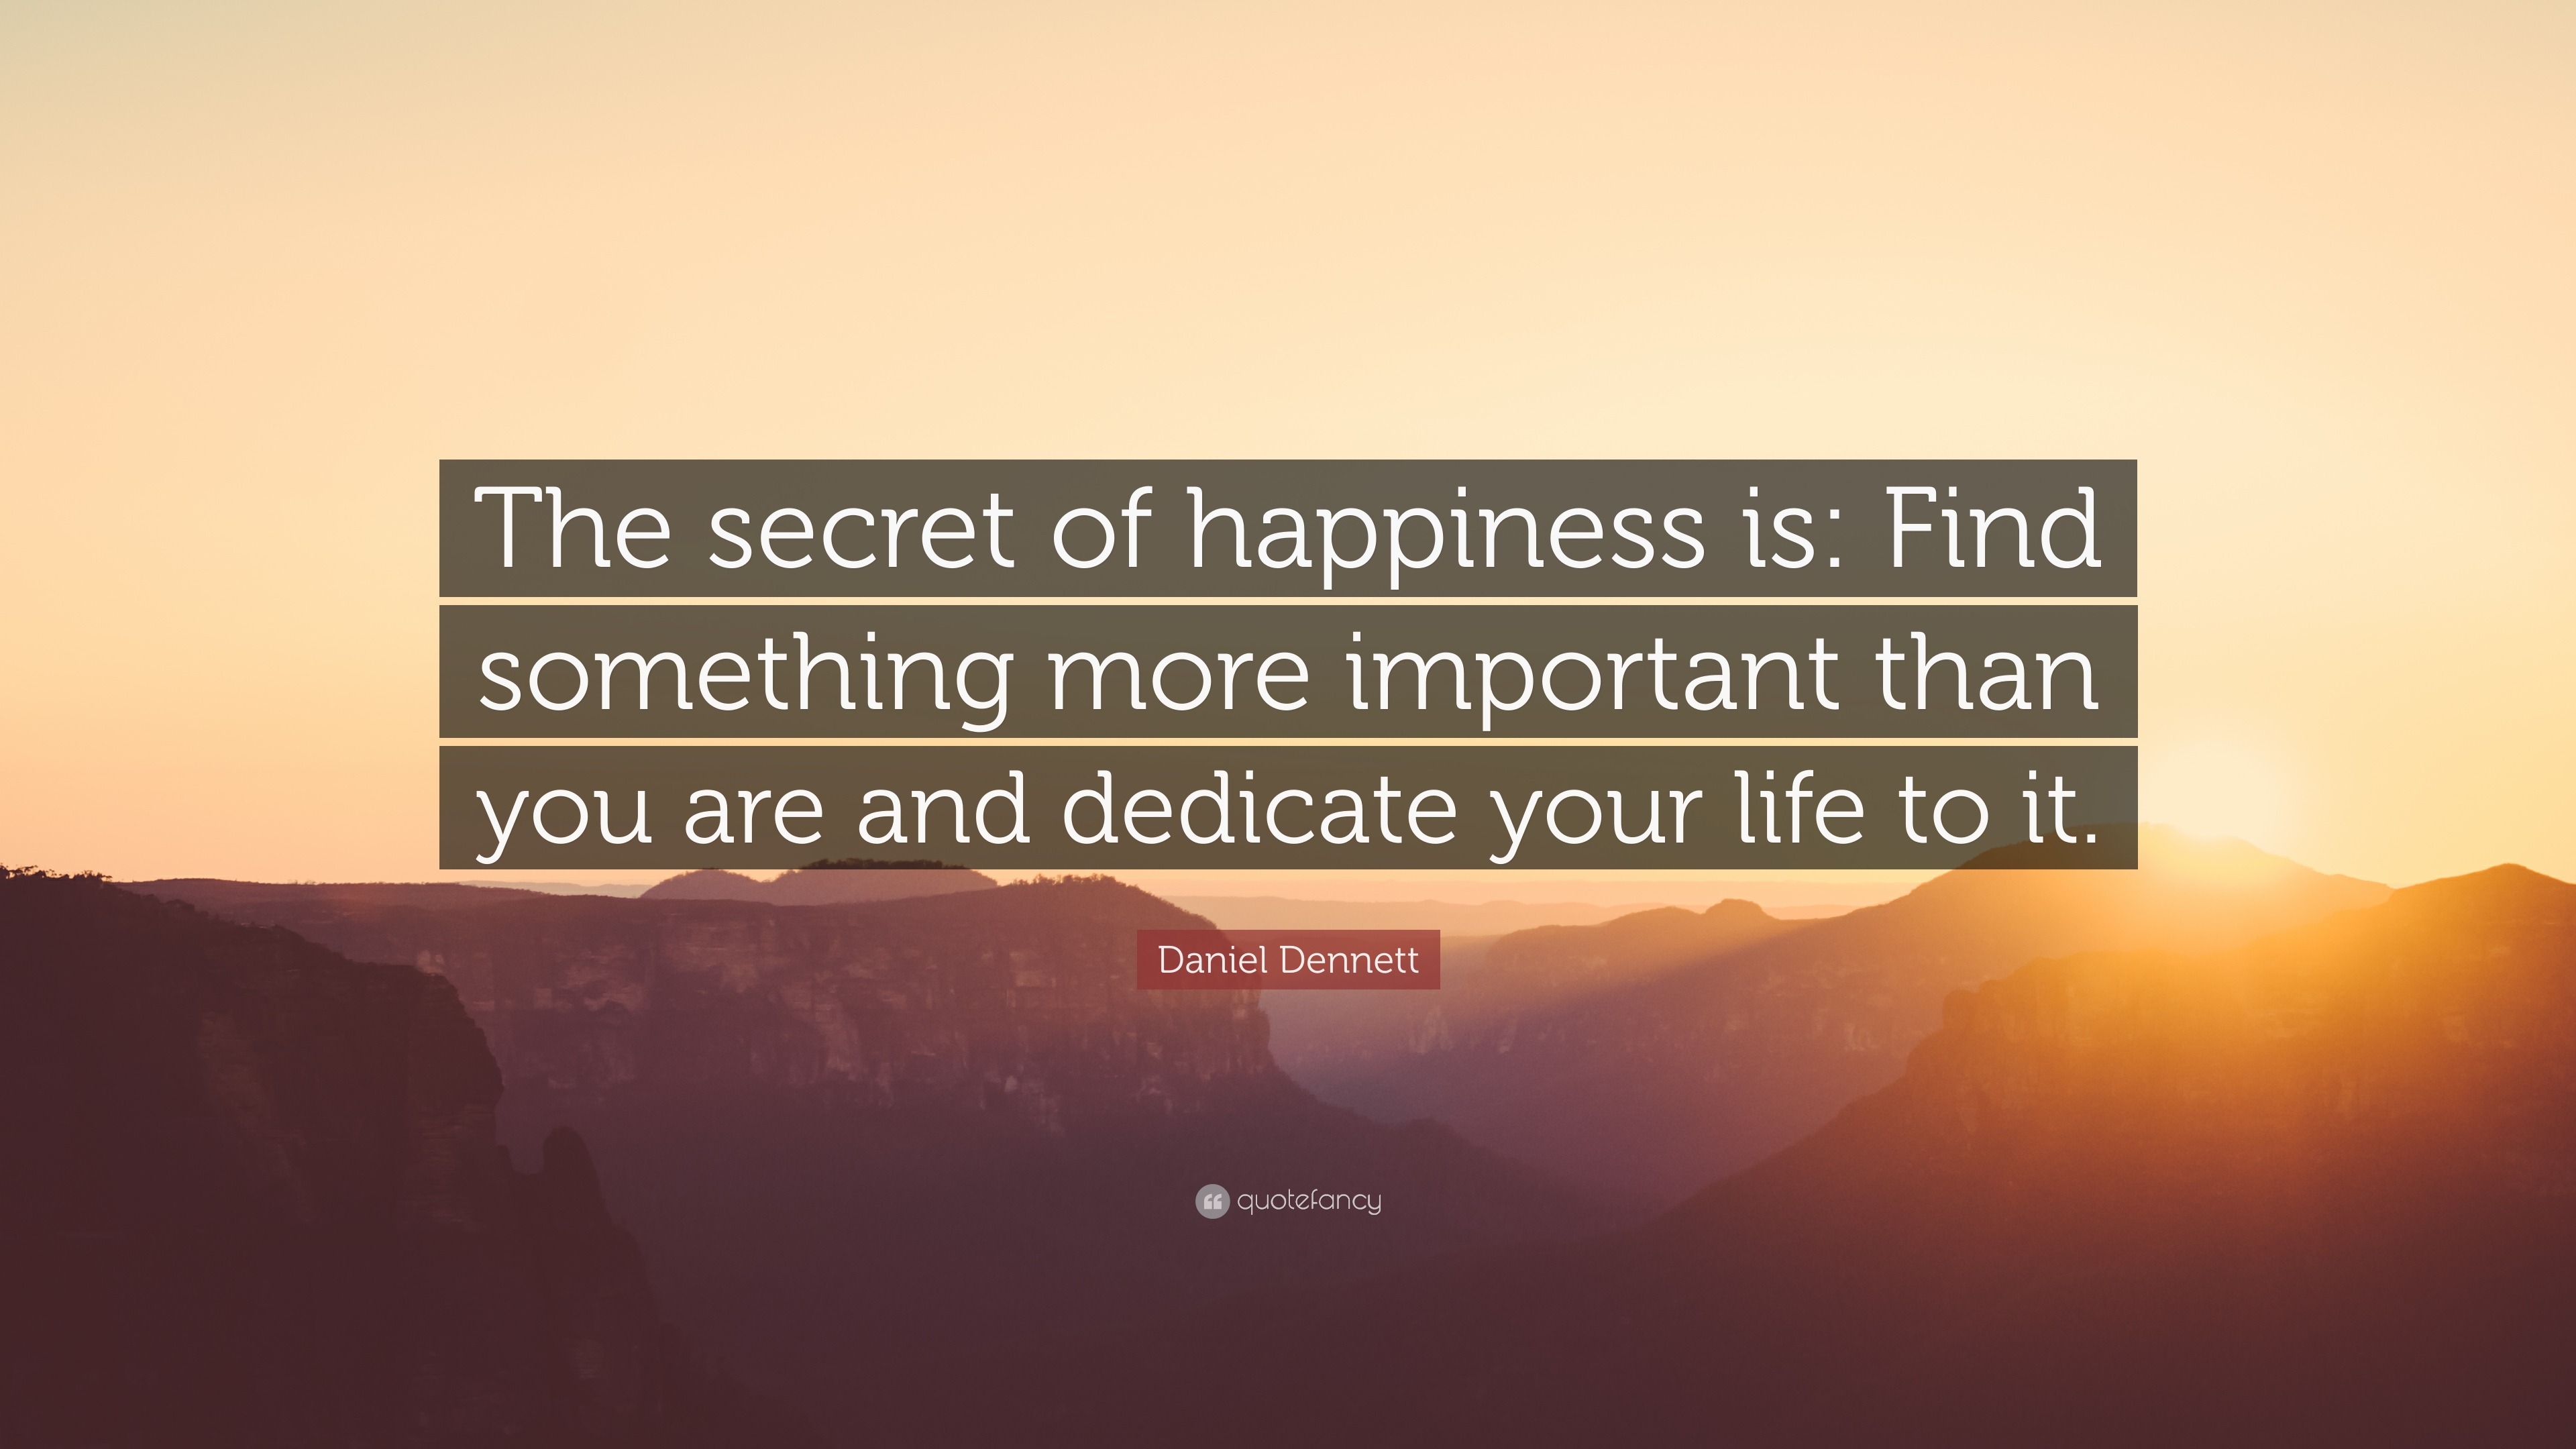 Daniel Dennett Quote: “The secret of happiness is: Find something more ...